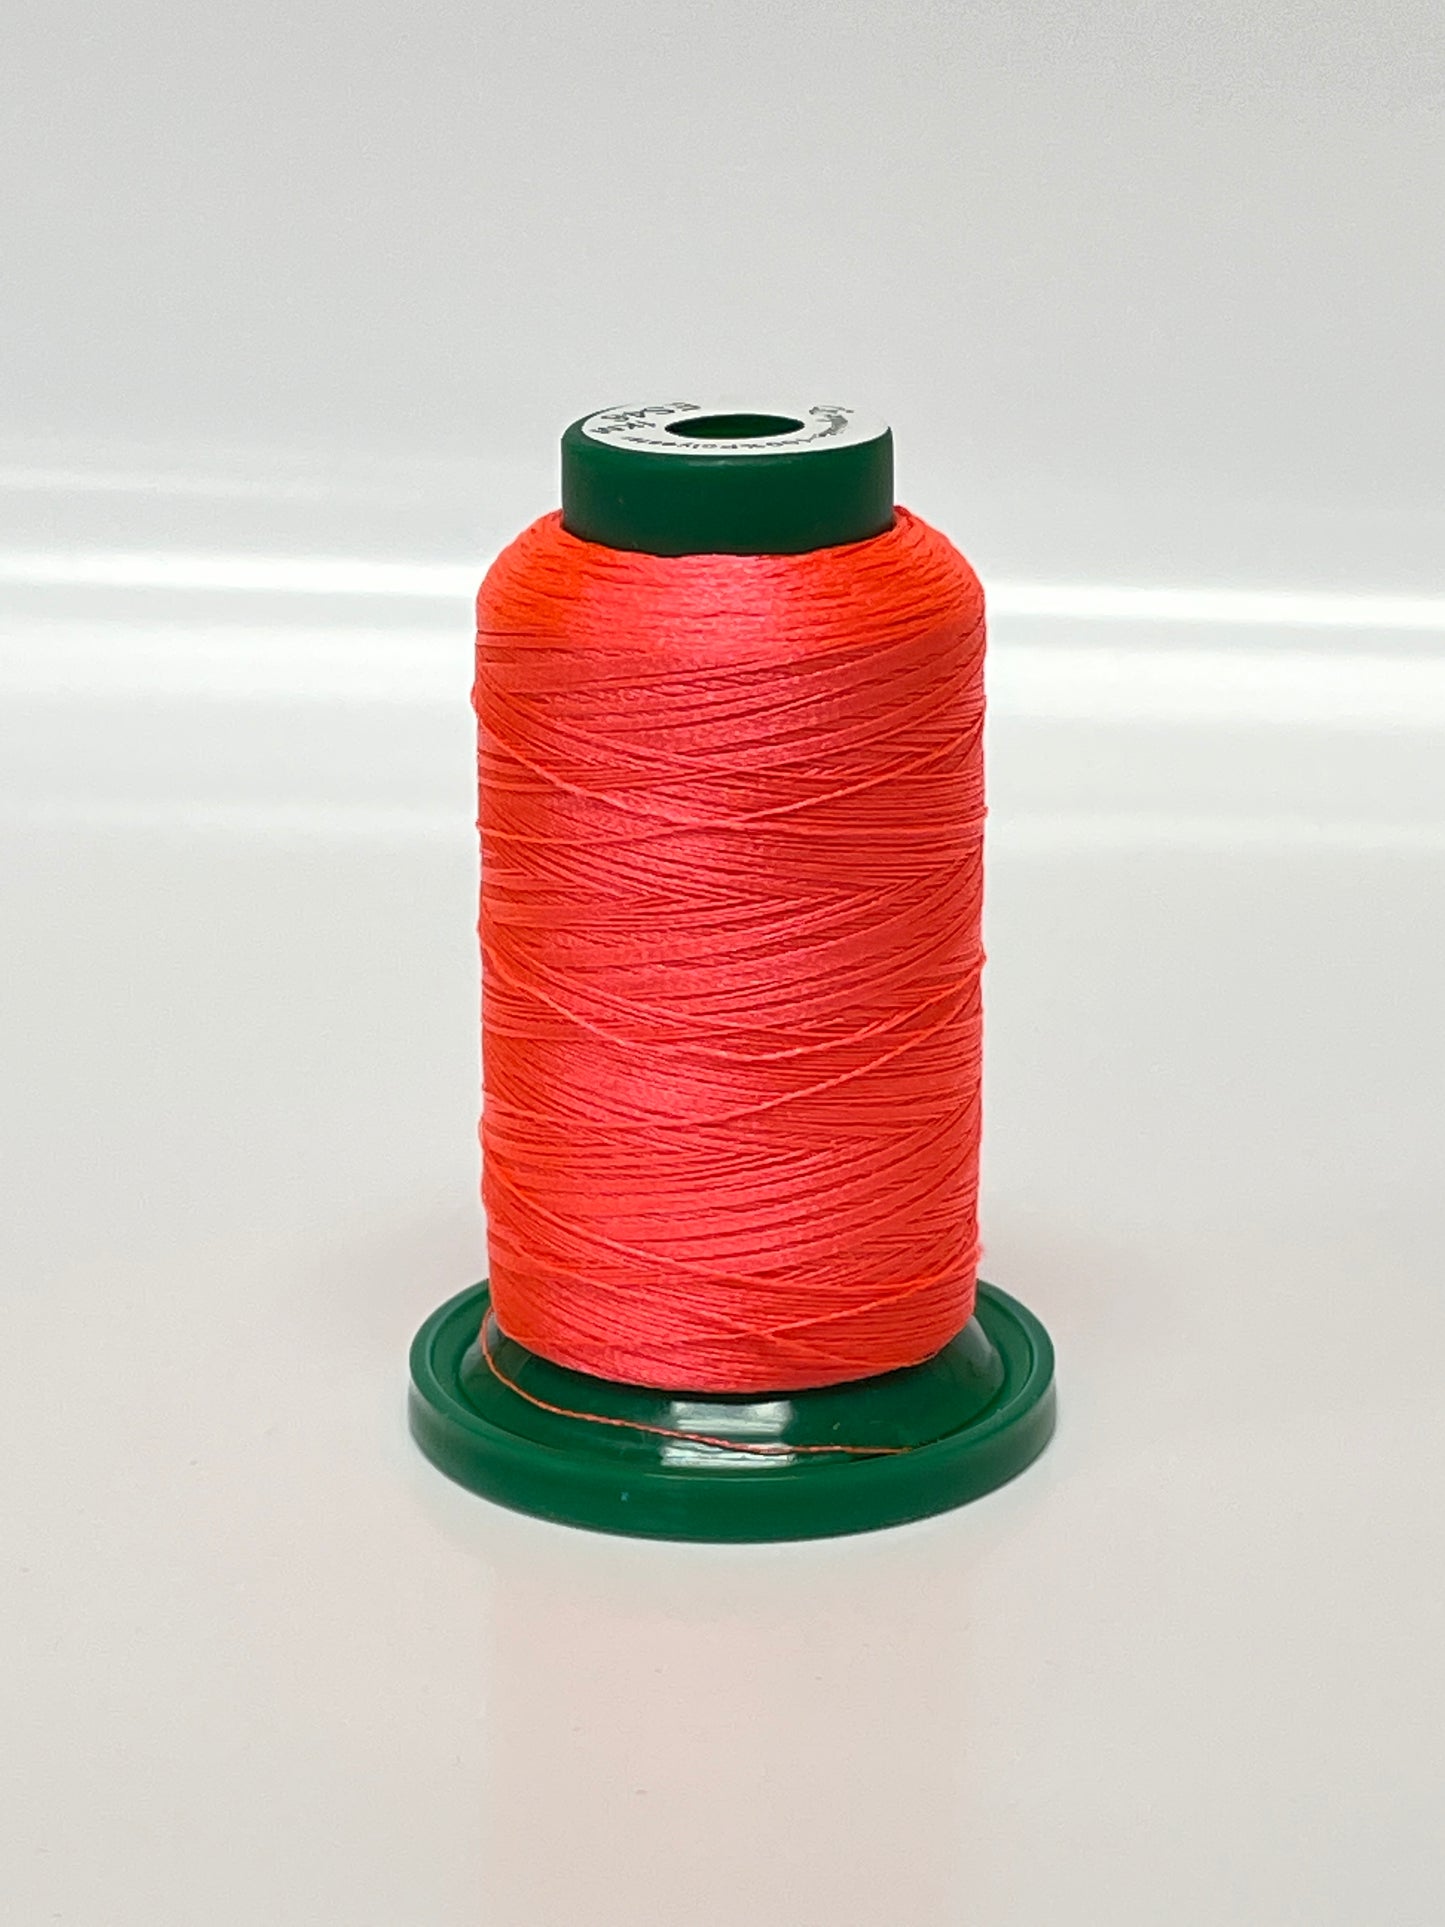 Exquisite Embroidery Thread - Neons